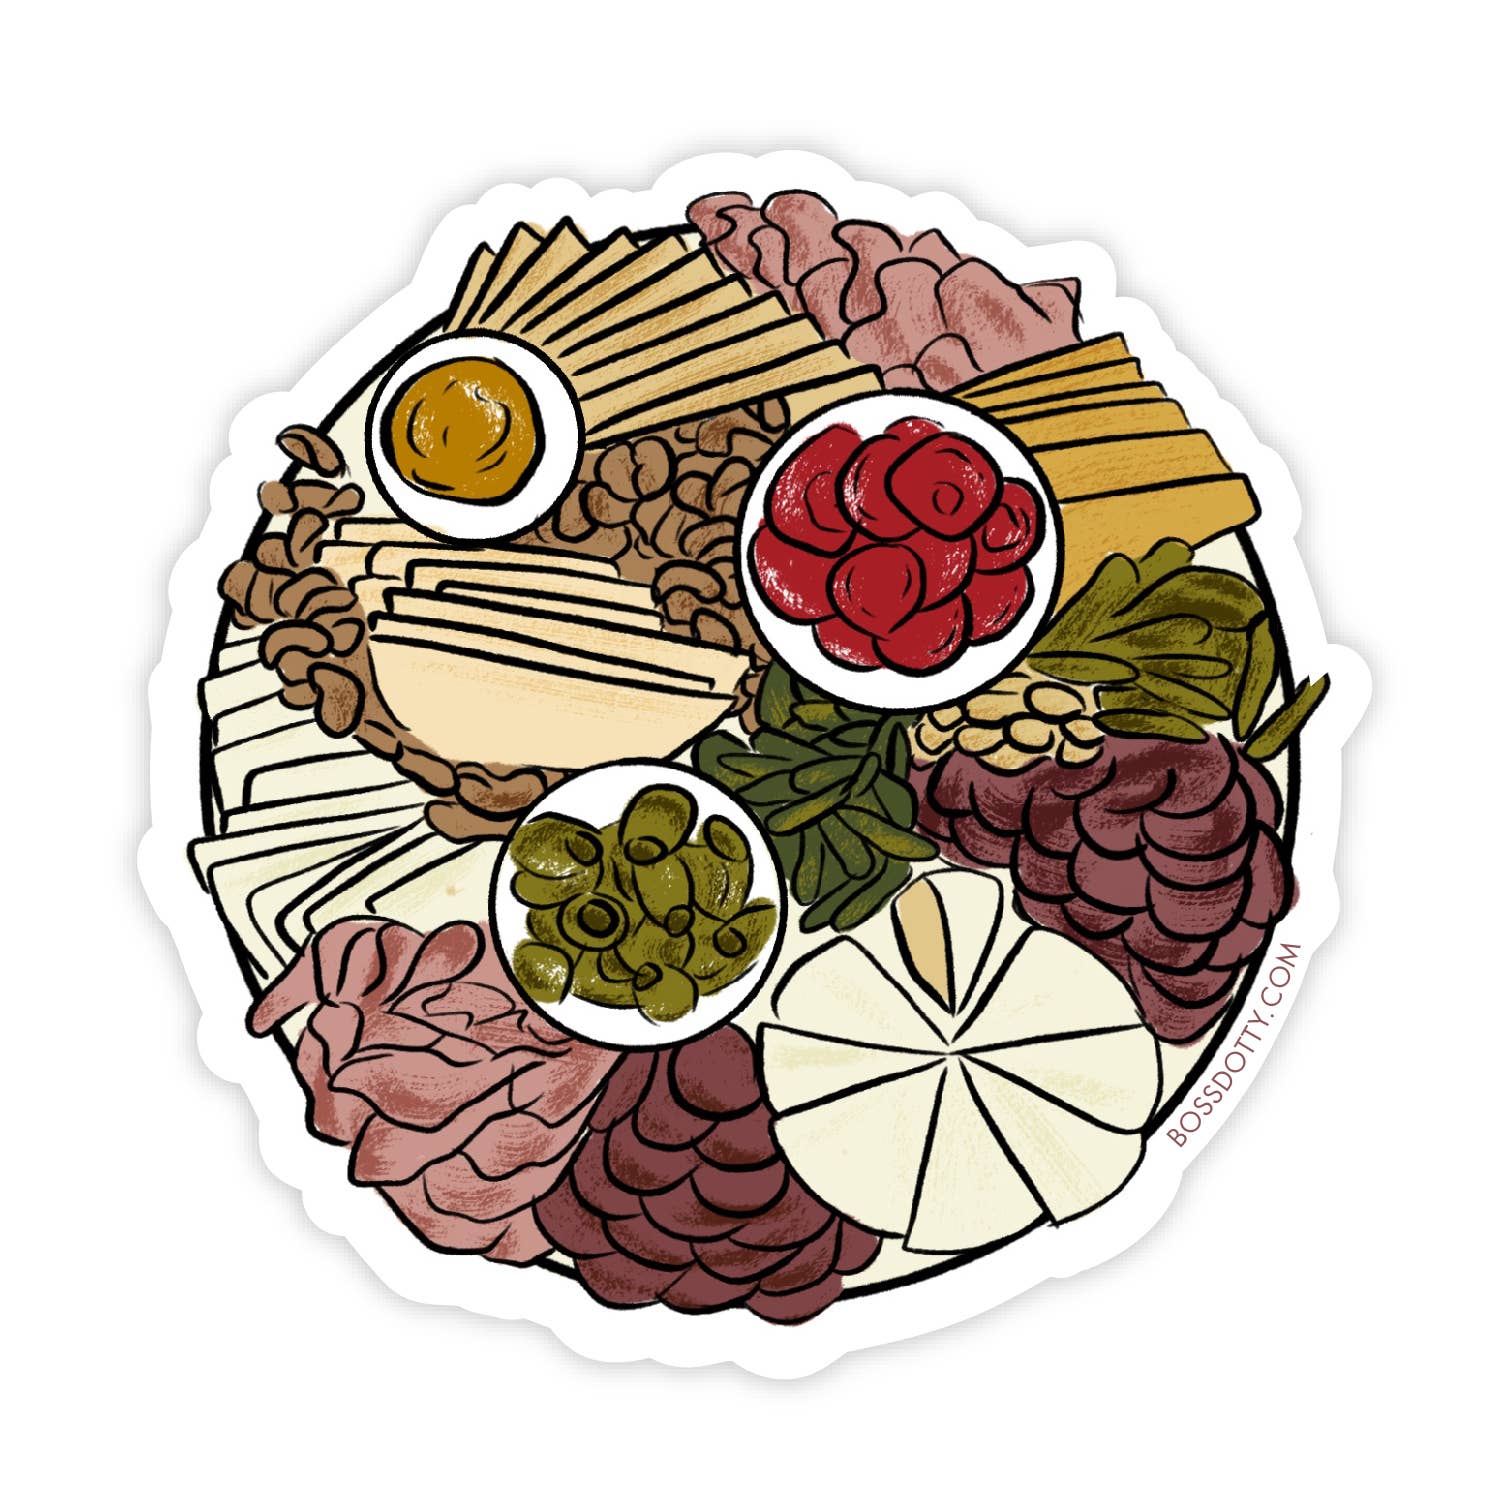 colorful sticker of illustrated charcuterie board items.